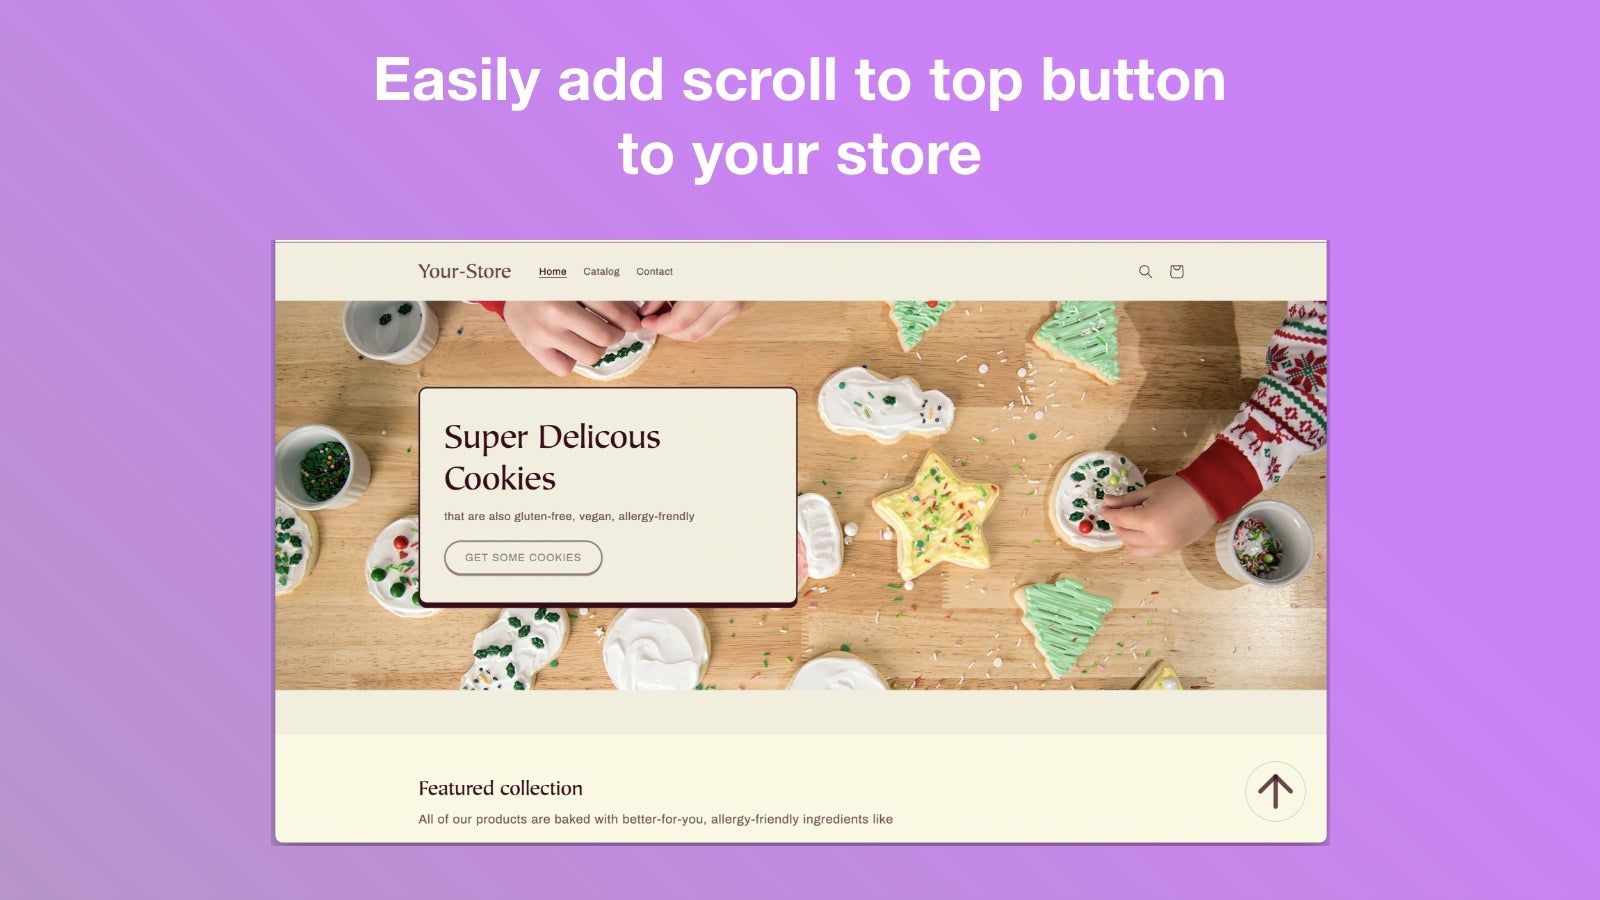 easy scroll up button - easily add scroll button to your store